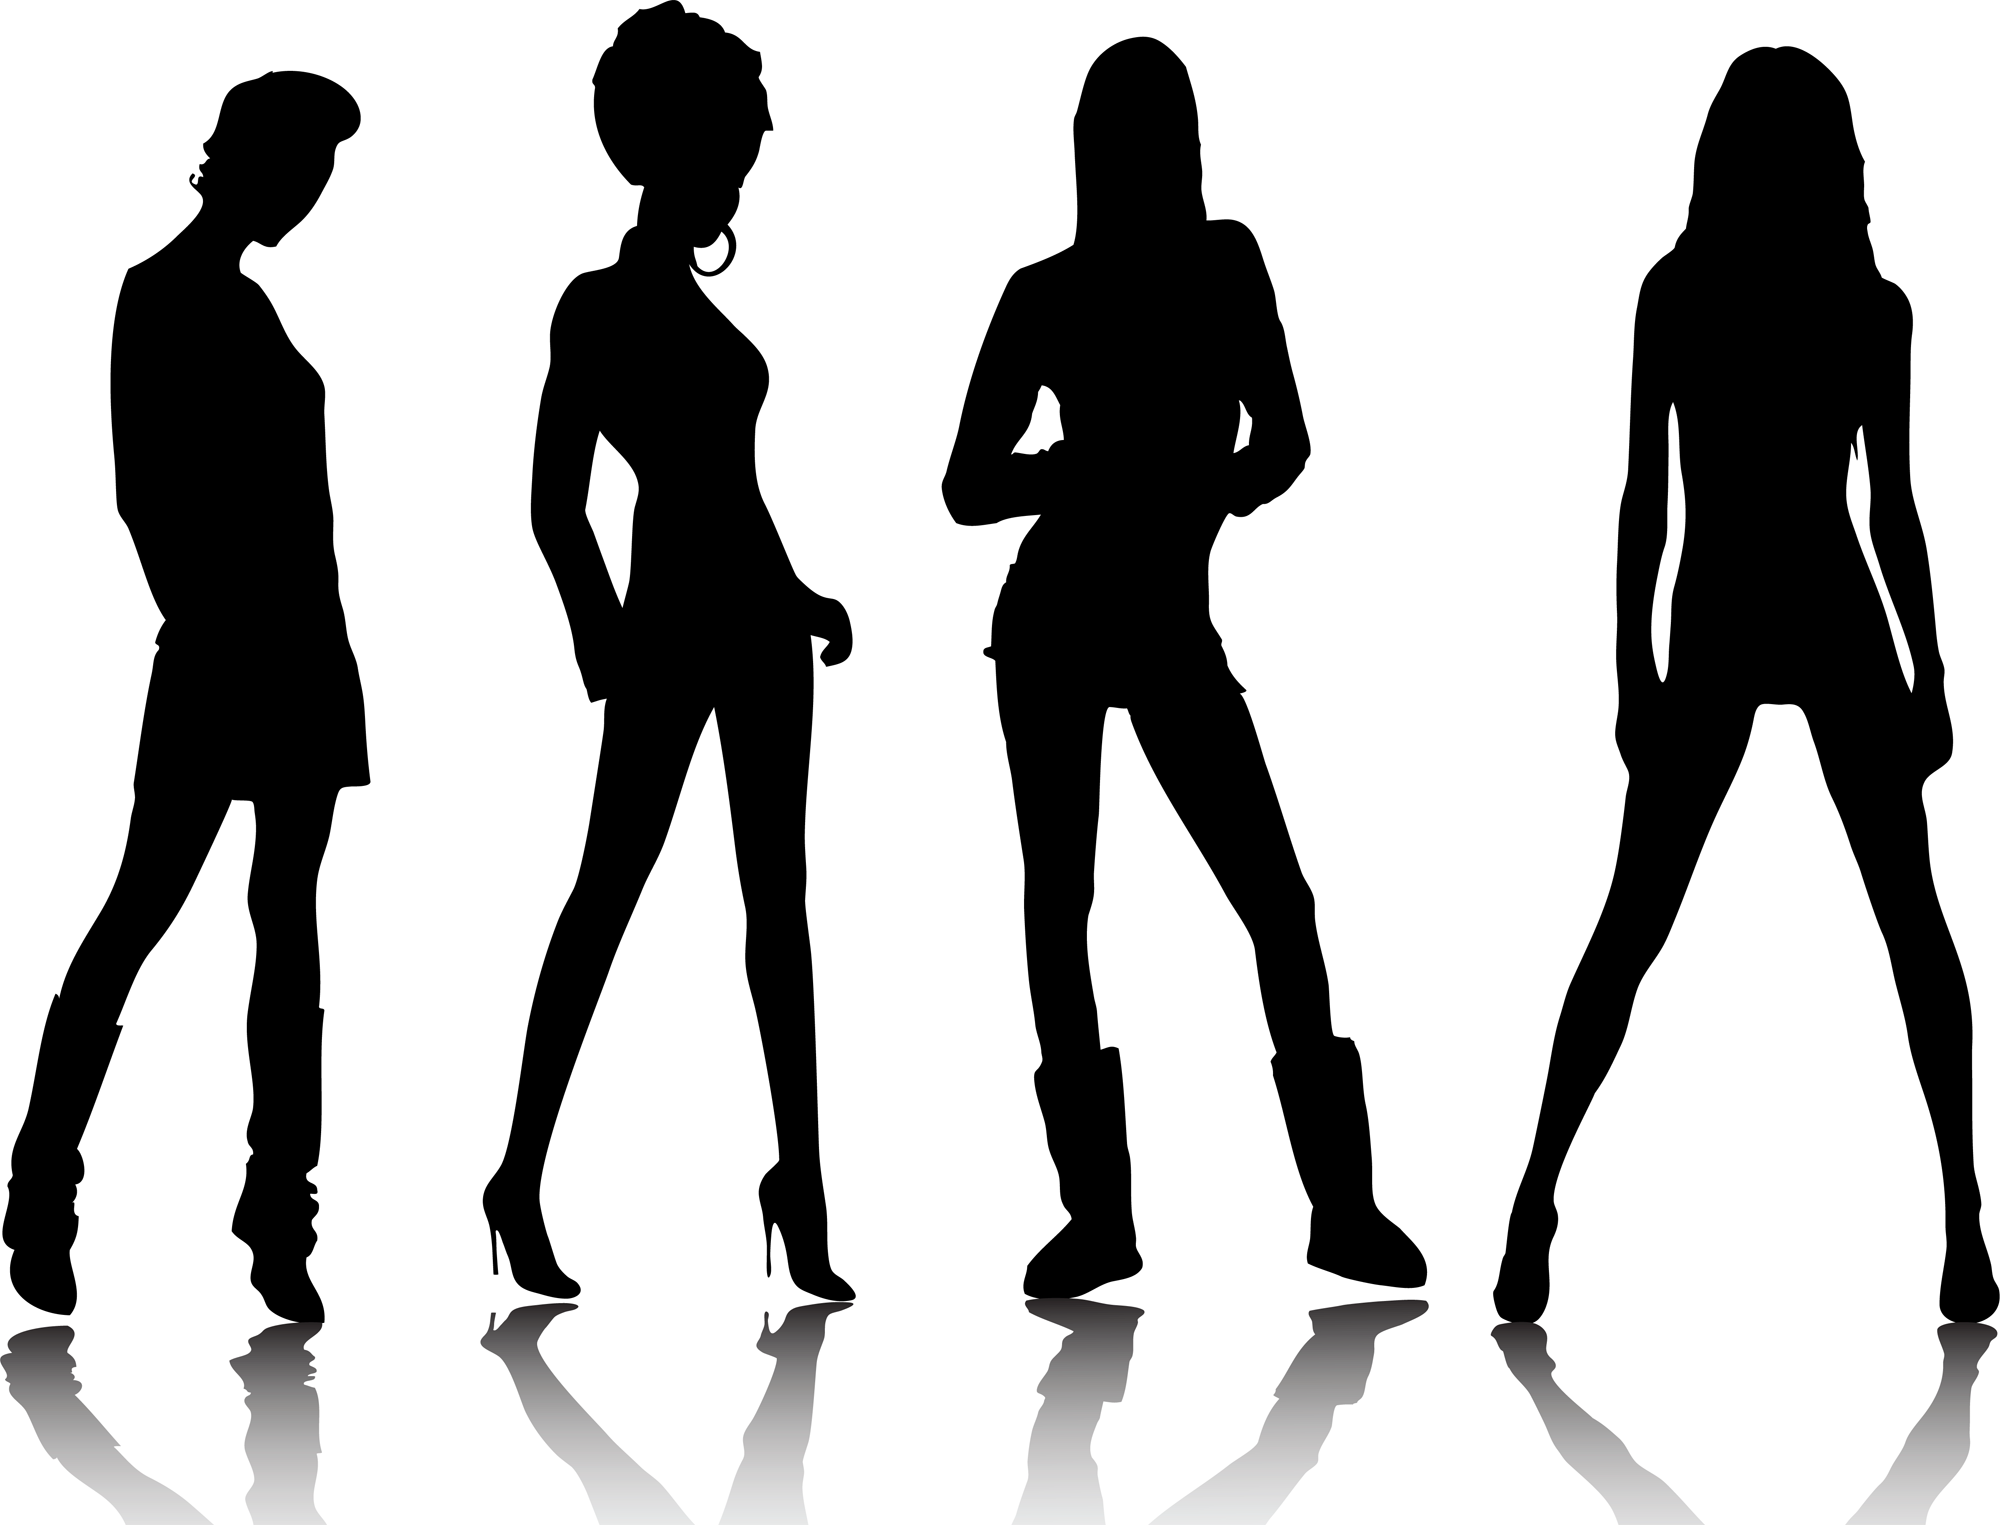 Woman Silhouette Vector Free Download - Clipart library